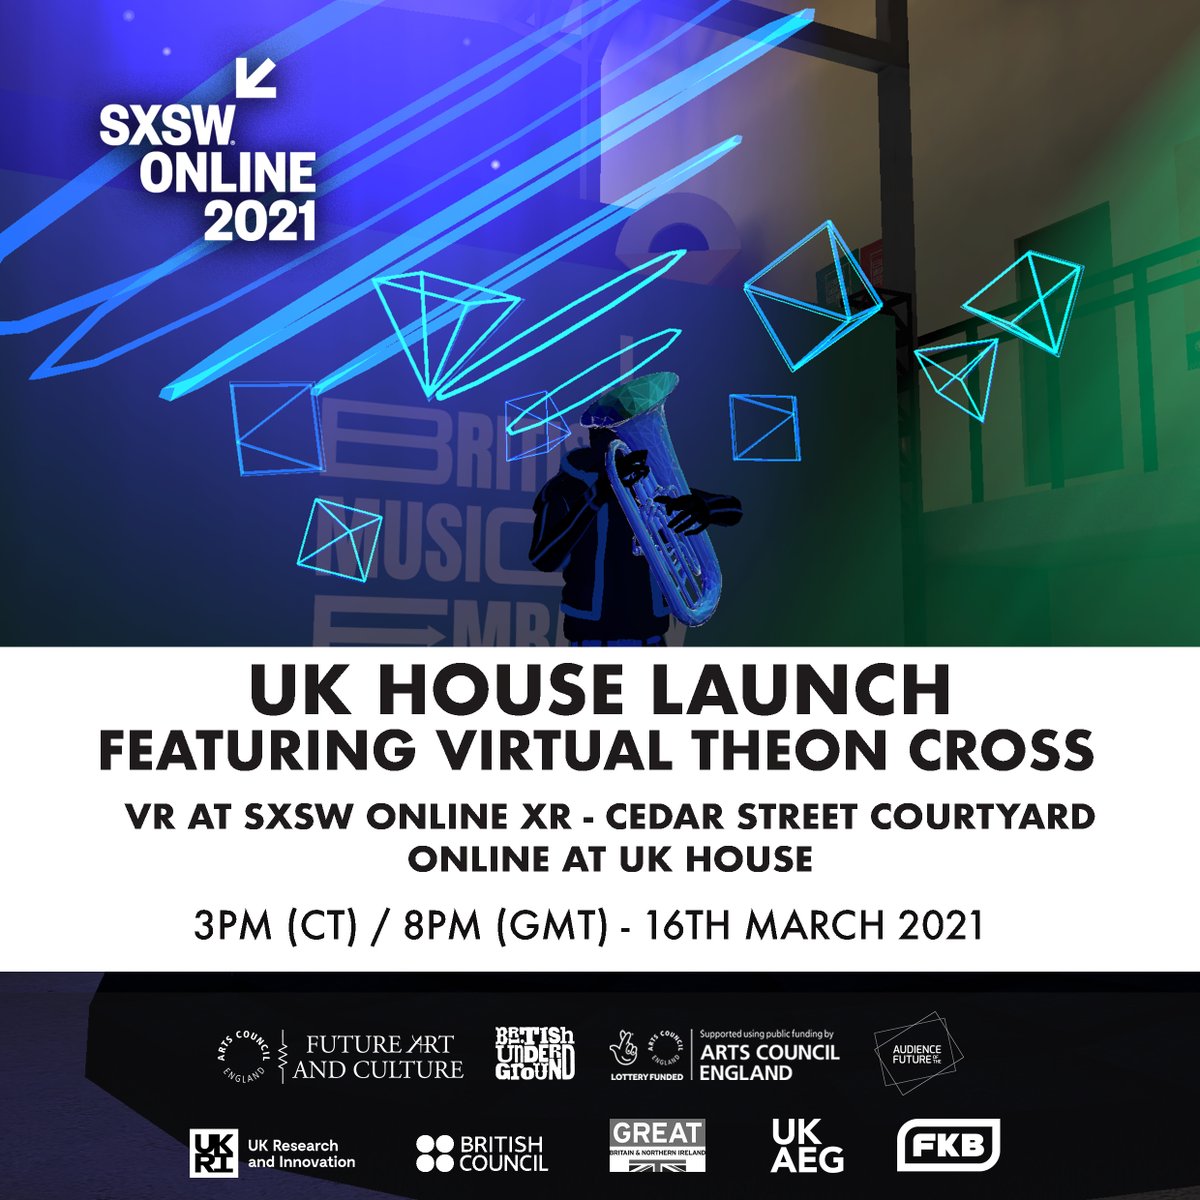 Join us tonight from 8pm for our UK House launch event featuring a virtual avatar of  @TheonCross filmed at   @AbbeyRoad for more information head to the theukhouse.com - See you there! 
#UKATSXSW #UKHouse #FutureArtandCulture #SXSWOnlin